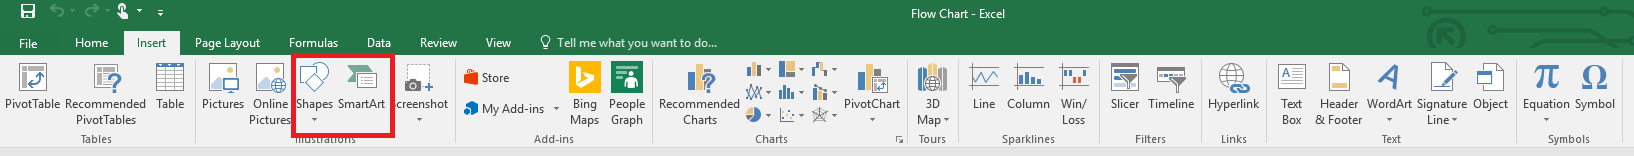 Use “Shapes” or “SmartArt” for creating flowcharts in Excel